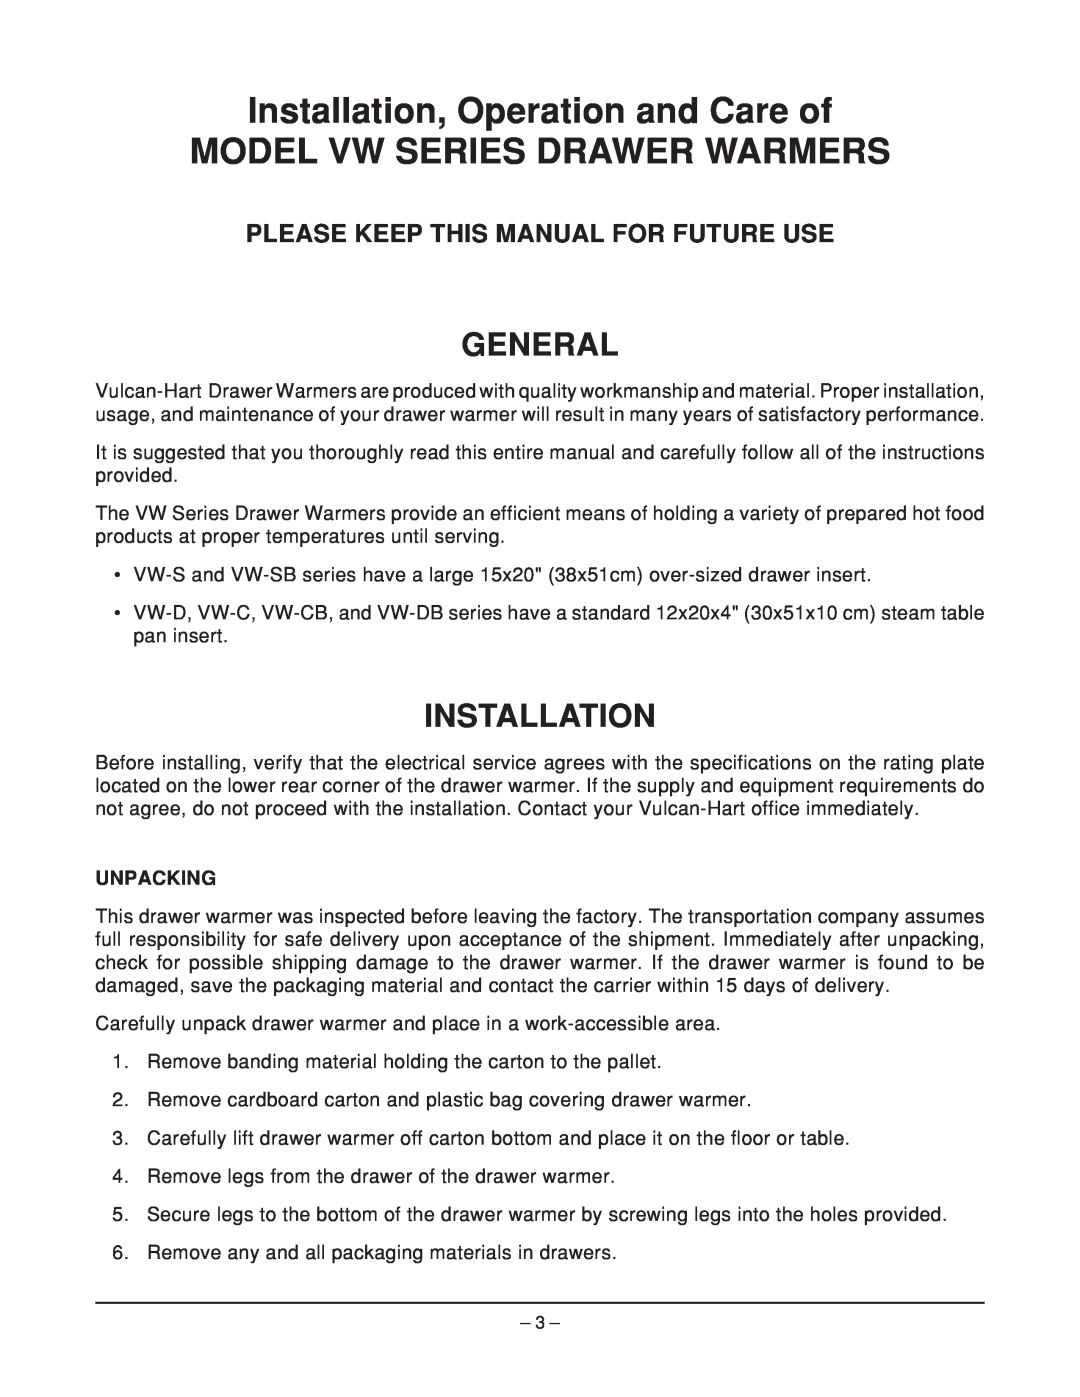 Vulcan-Hart VW3D ML-126512, VW2SB ML-126503 General, Installation, Unpacking, Please Keep This Manual For Future Use 